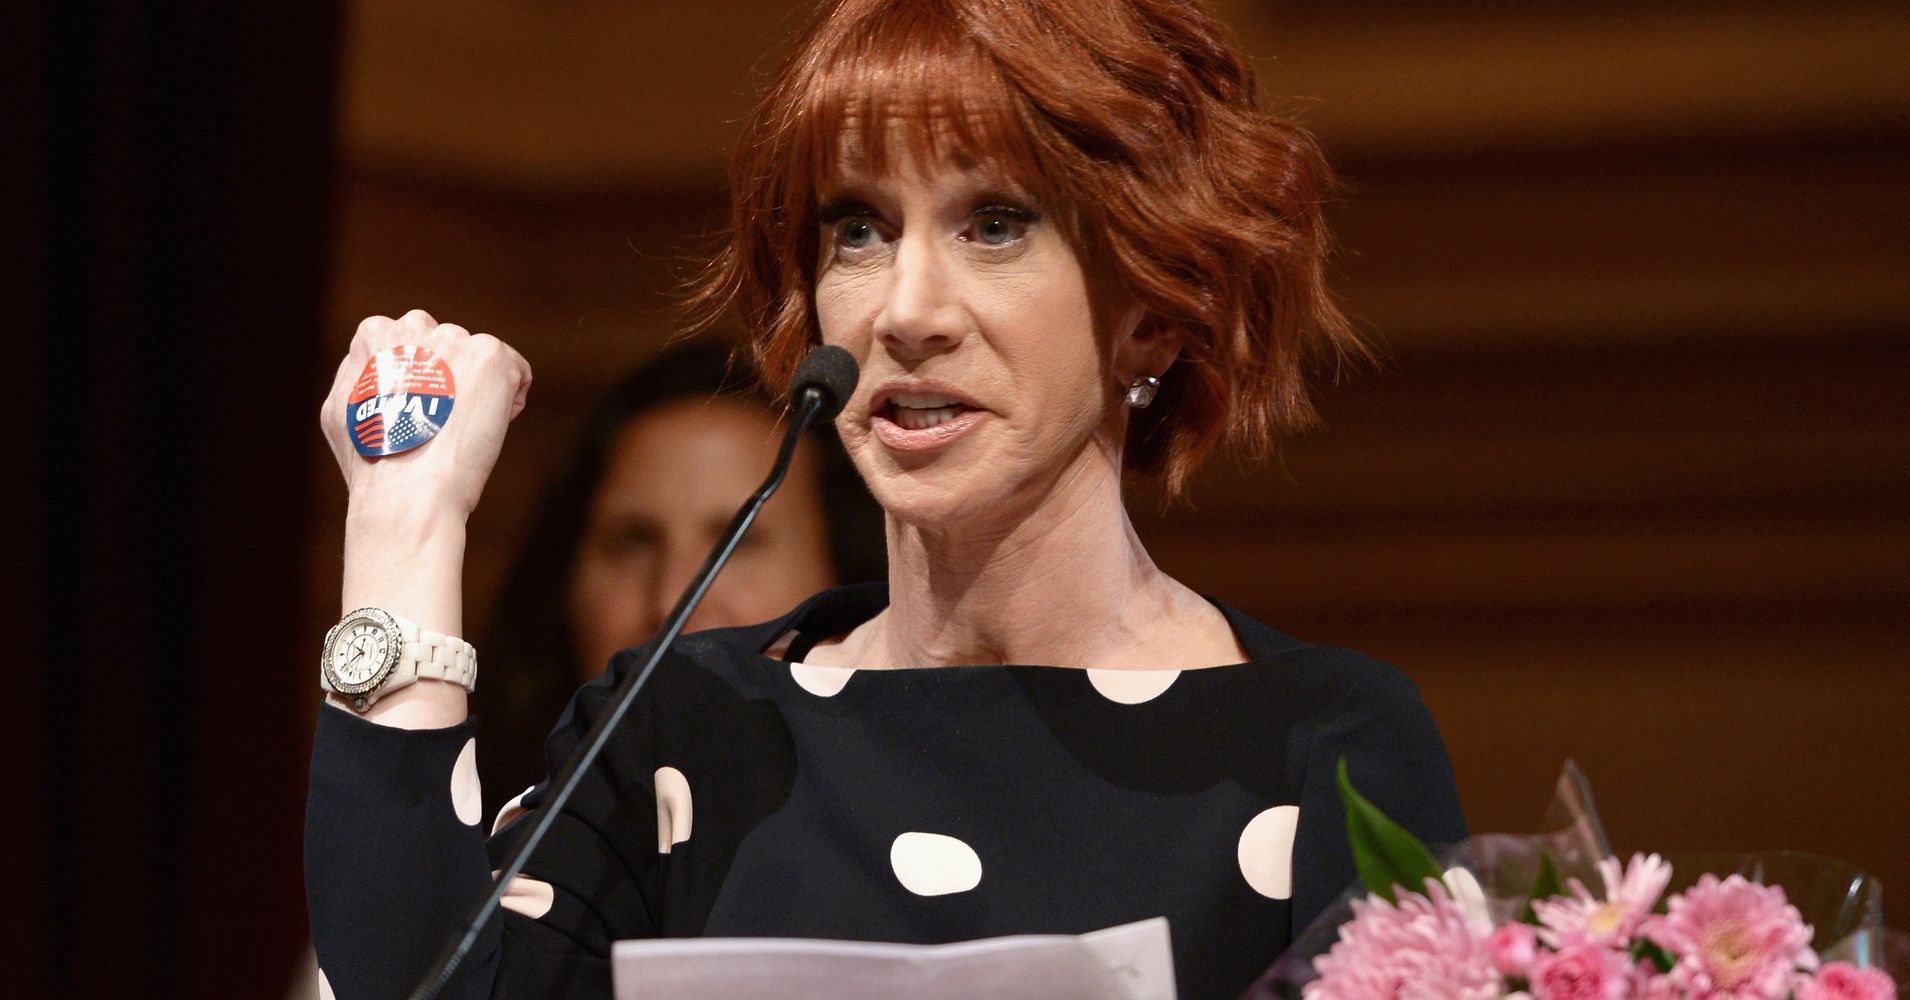 Kathy Griffin Says 'F**k You' To 'Feckless Piece Of S**t' Melania Trump ...